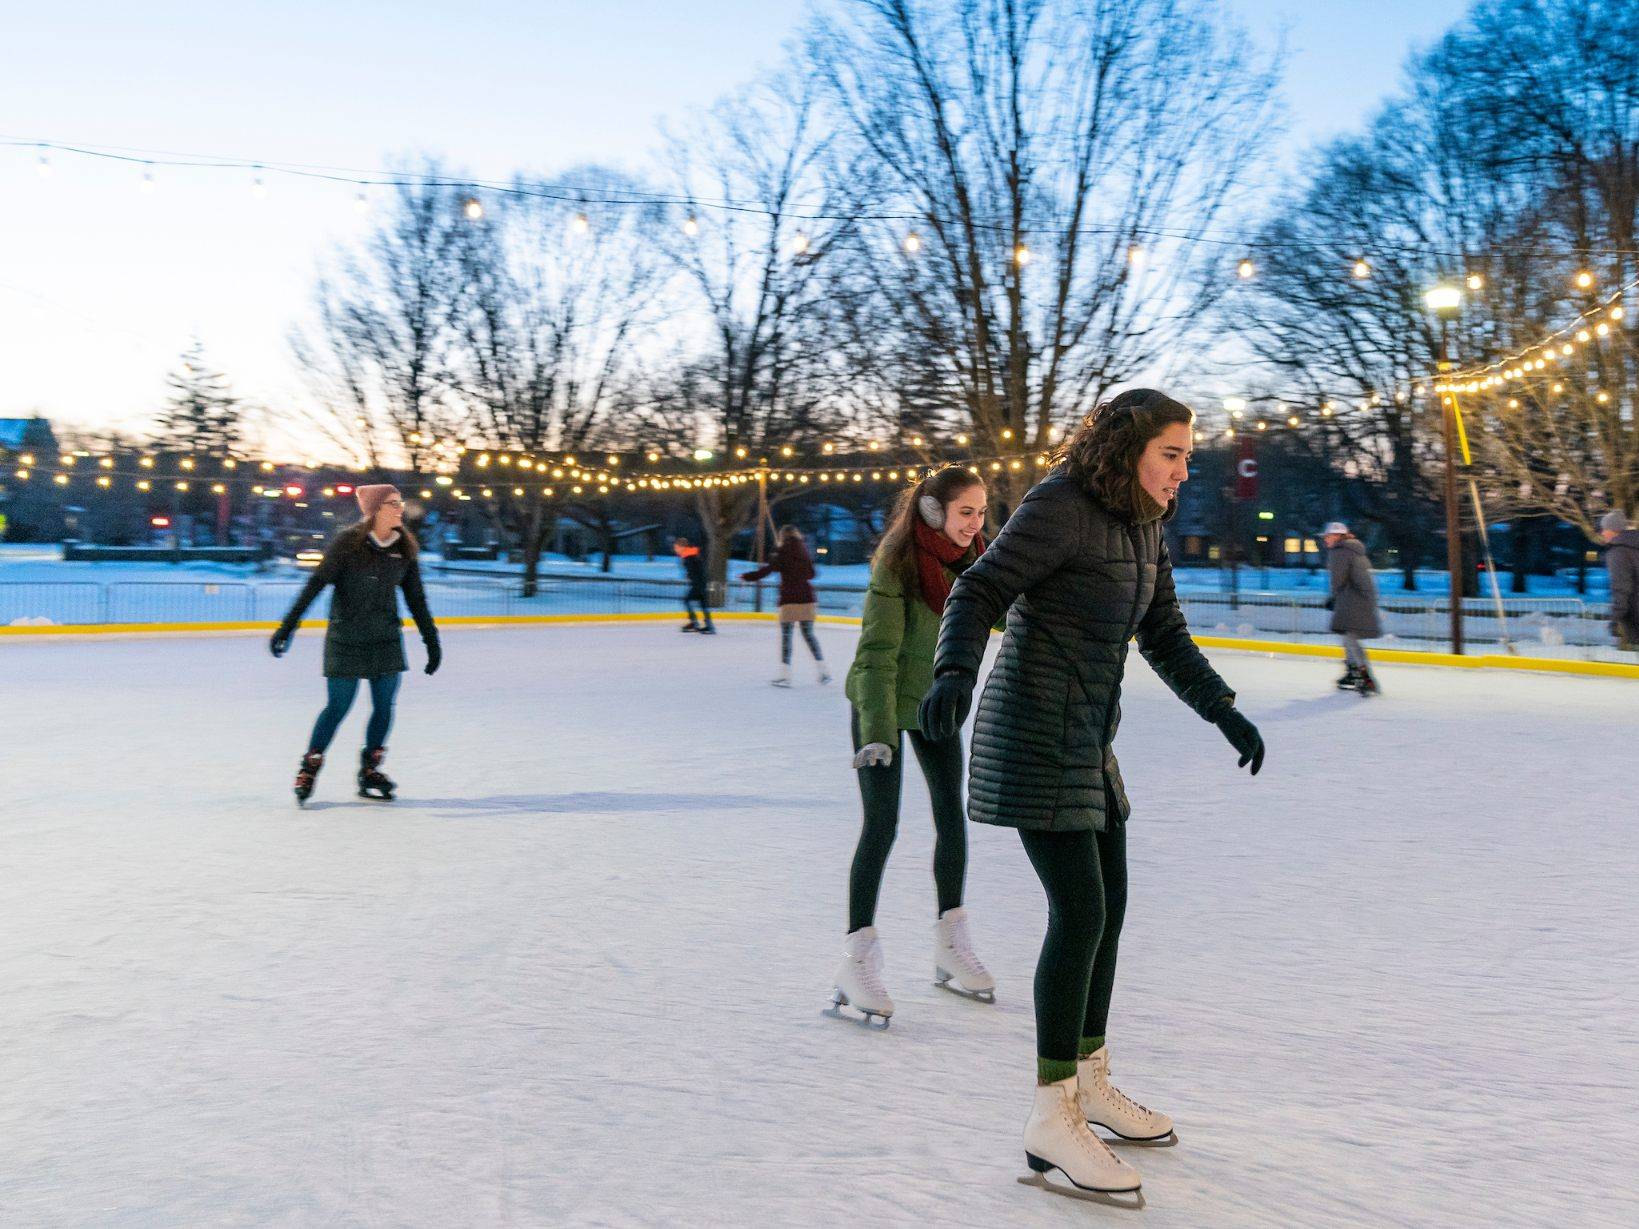 Colgate staff and students skate on the outdoor rink on Whitnall Field.